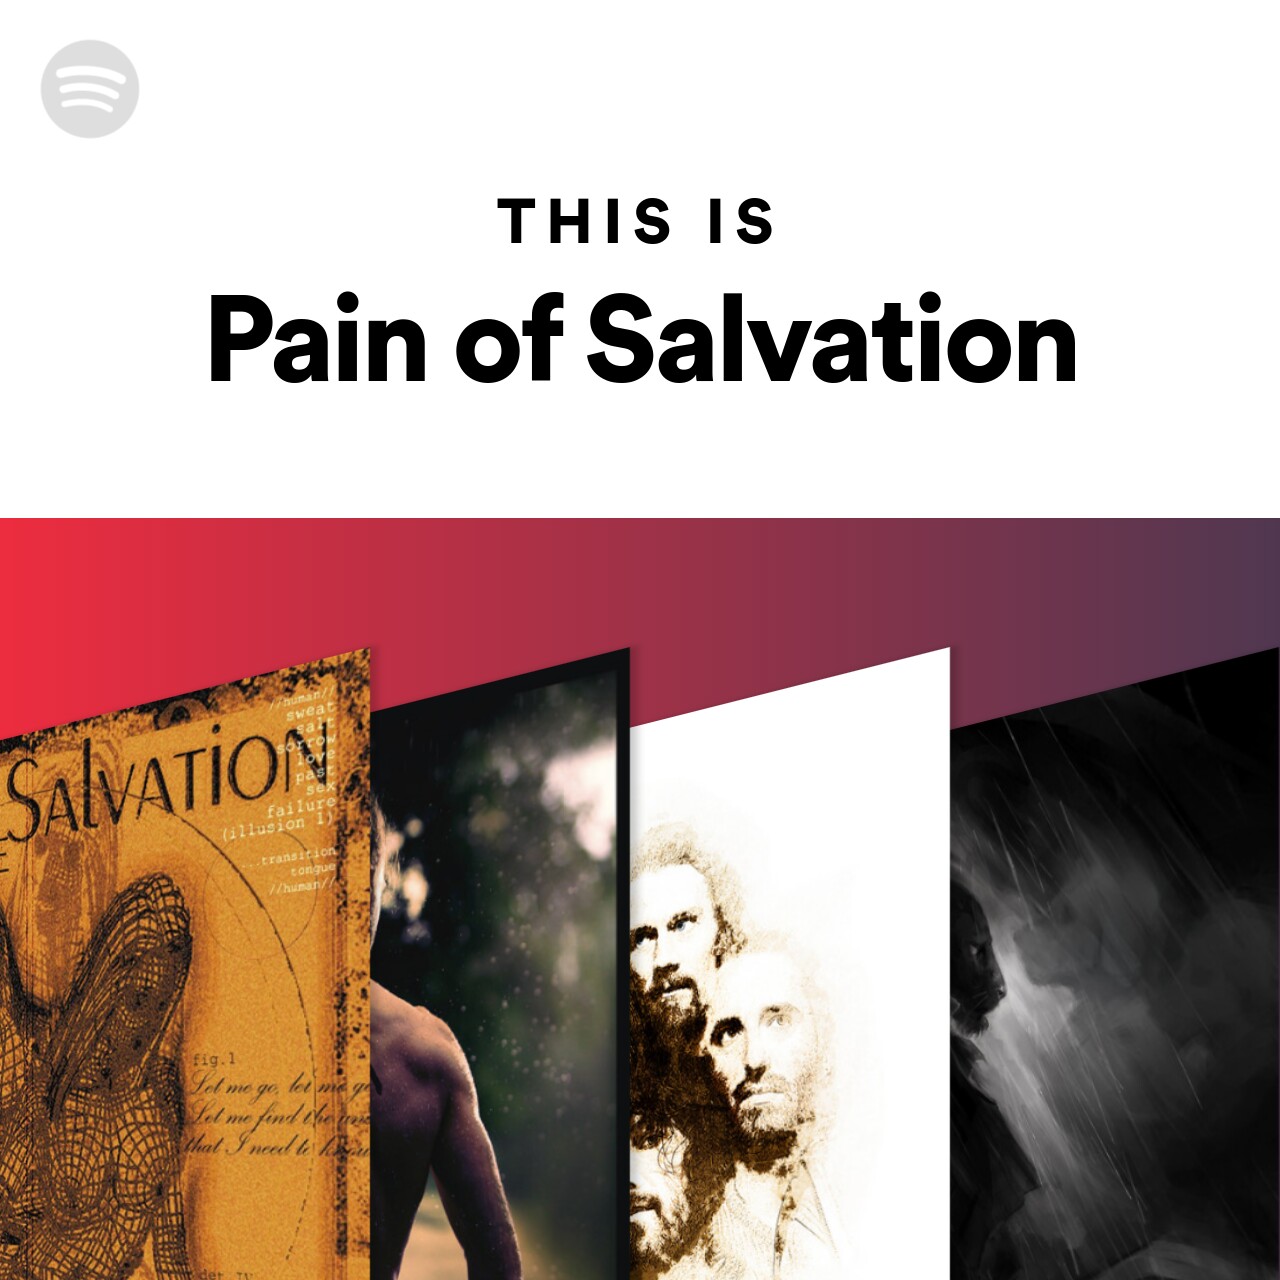 This Is Pain of Salvation